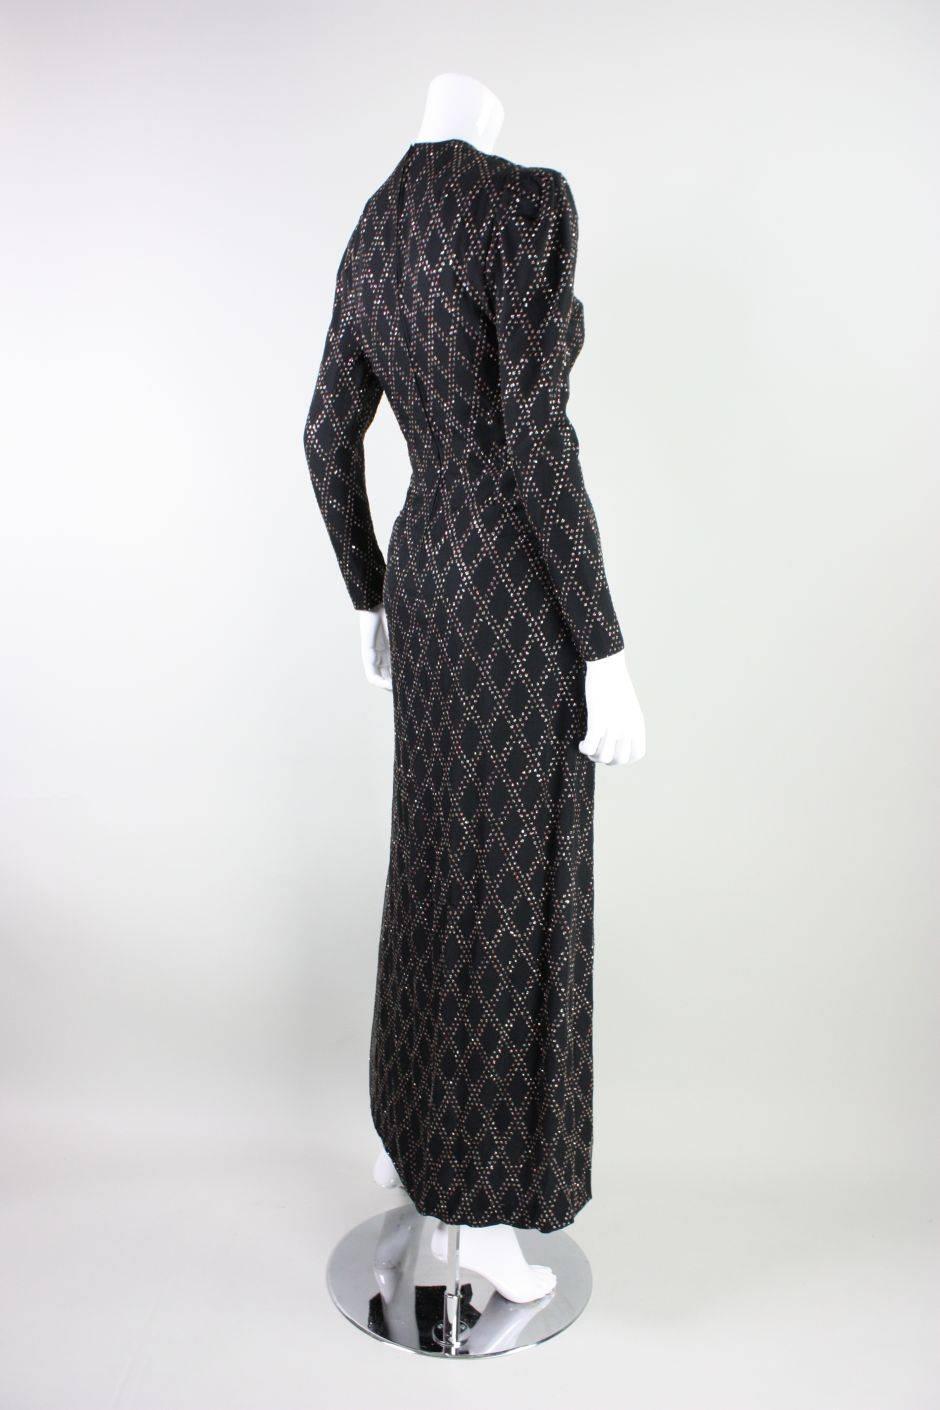 Women's 1970's Black Silk Chiffon Gown with Glitter Pattern For Sale